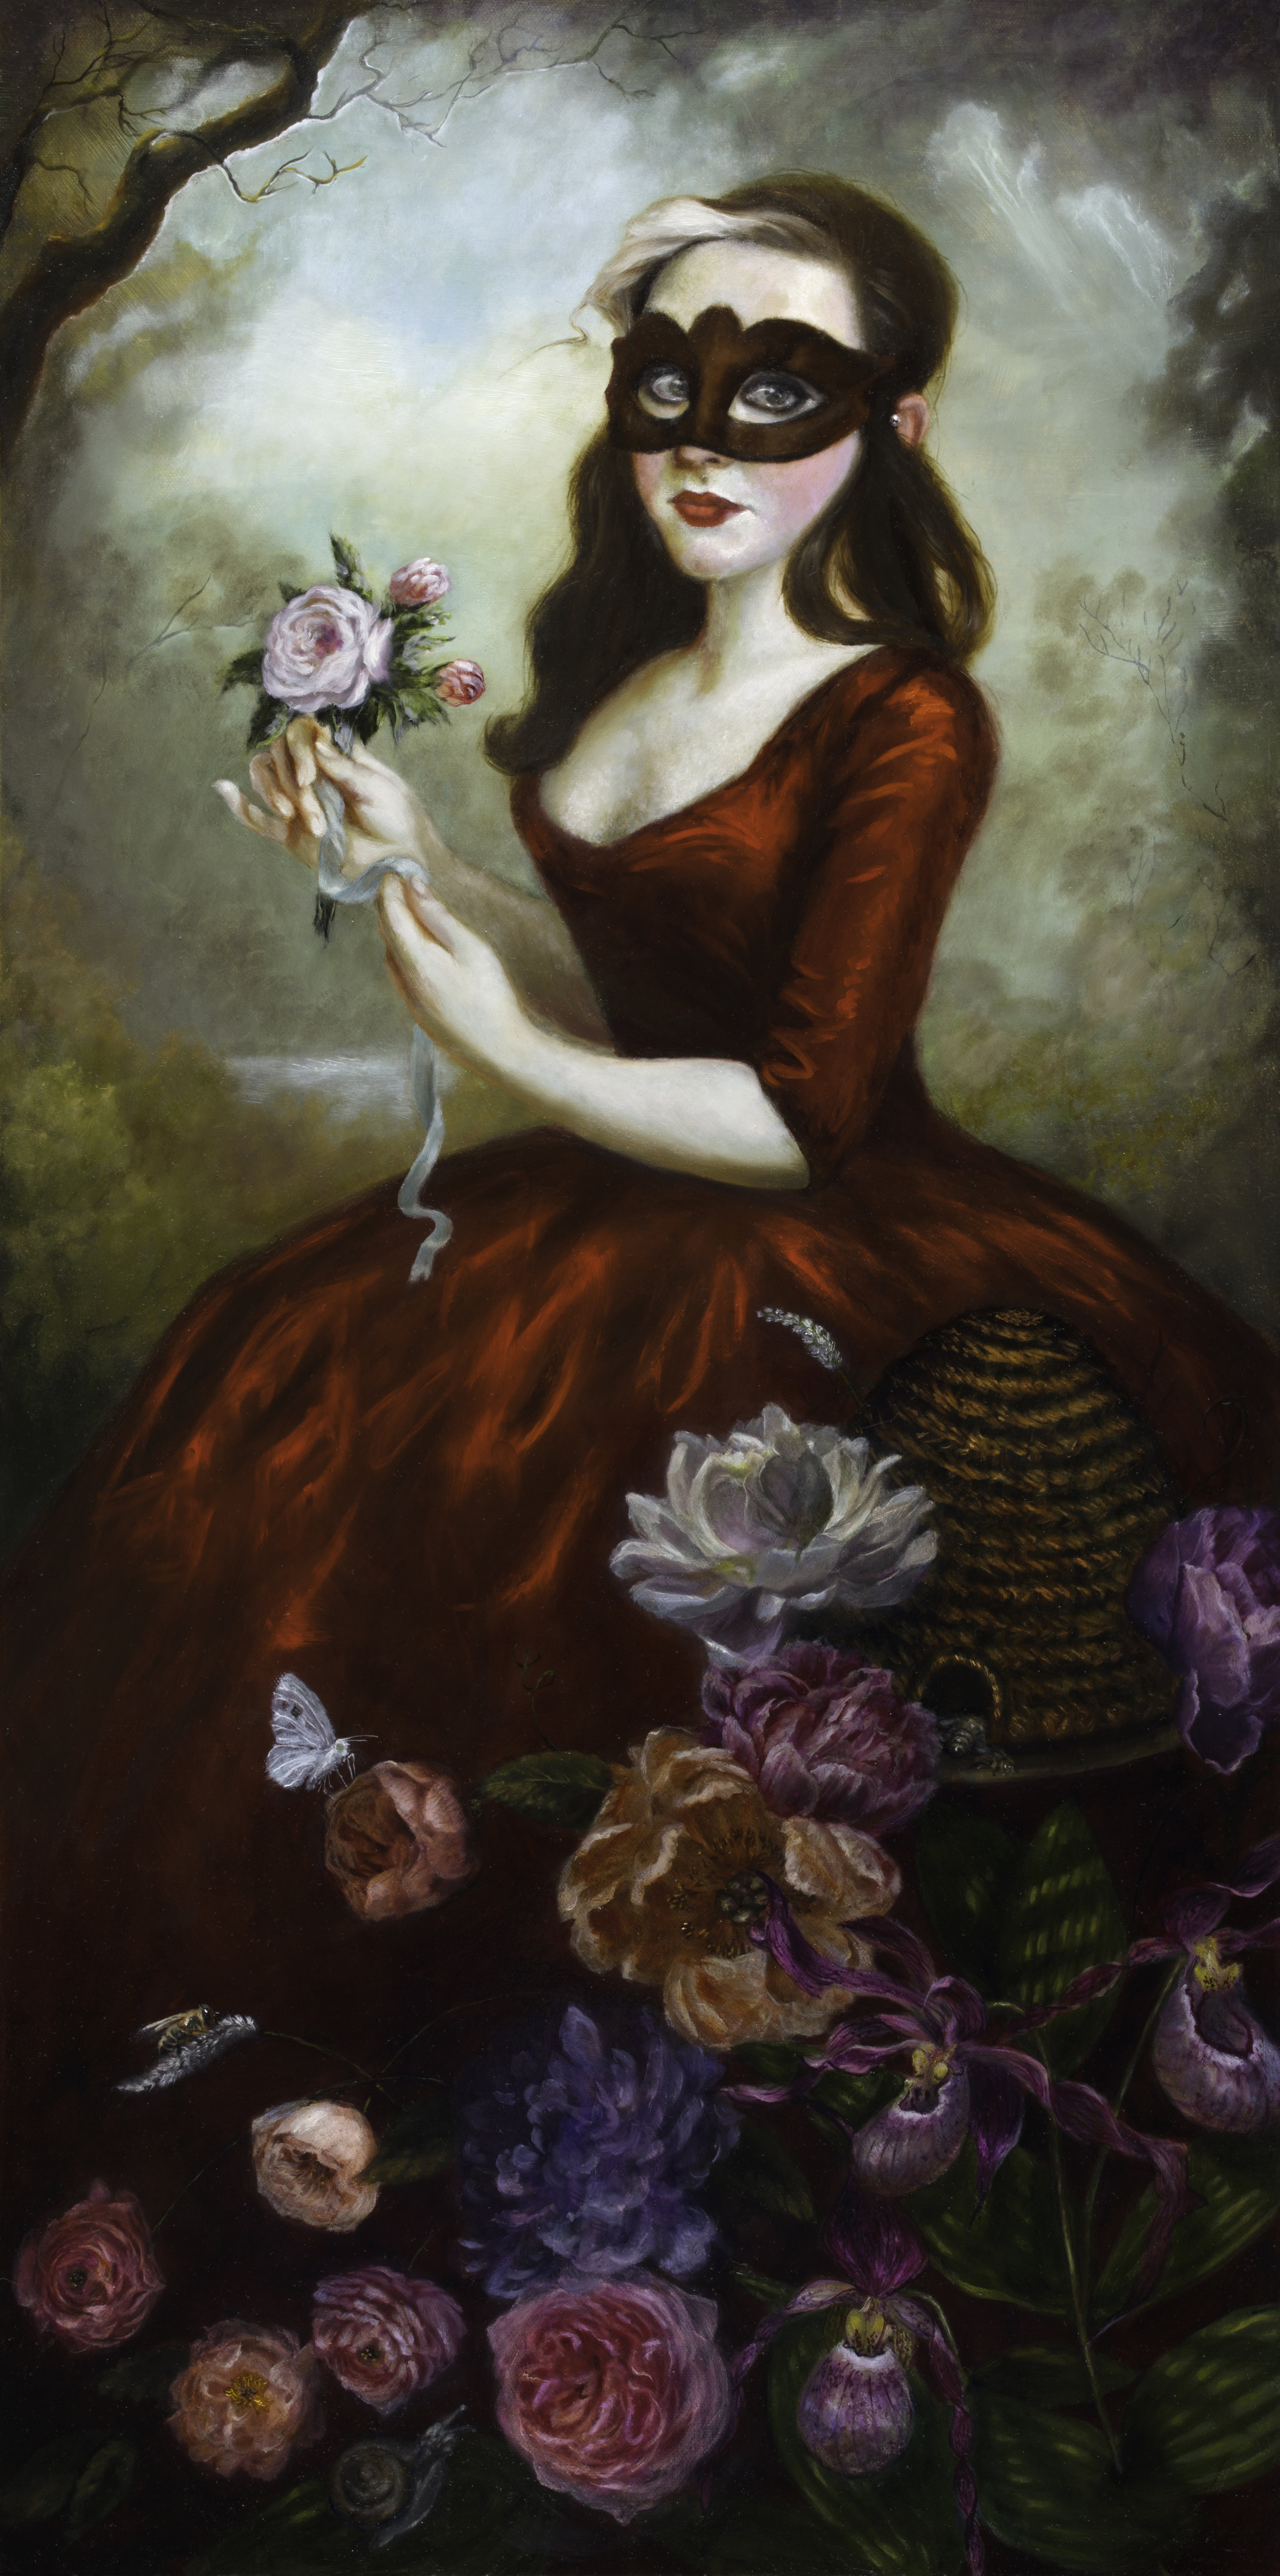  The Girl in a Red Dress - oil on canvas  22" x 38" with ornate frame  It was channeling the Fragonard atmosphere as well as ViGée LeBrun’s Marie Antoinette paintings. This was a fun painting and I got to paint some pink Lady Slipper flowers - 18’ 